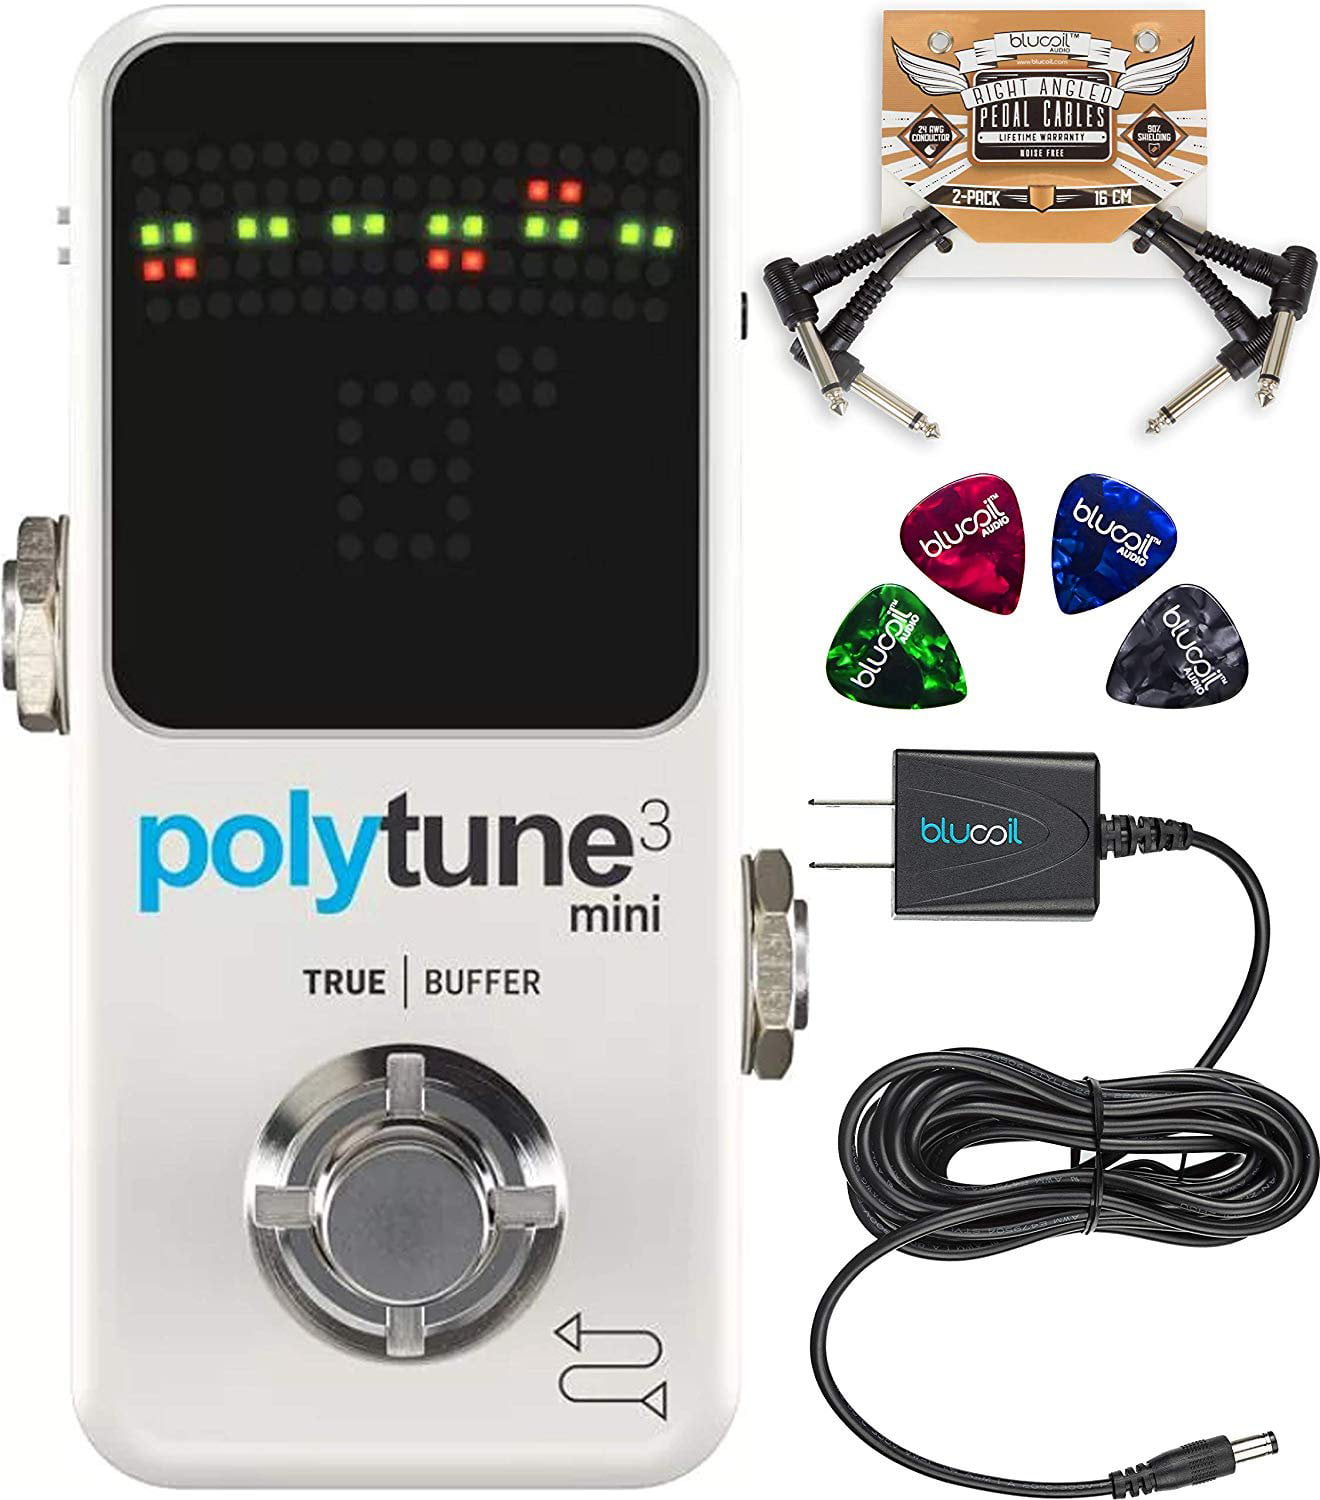 TC Electronic PolyTune 3 Mini Tuner Pedal with Blucoil 9V Adapter